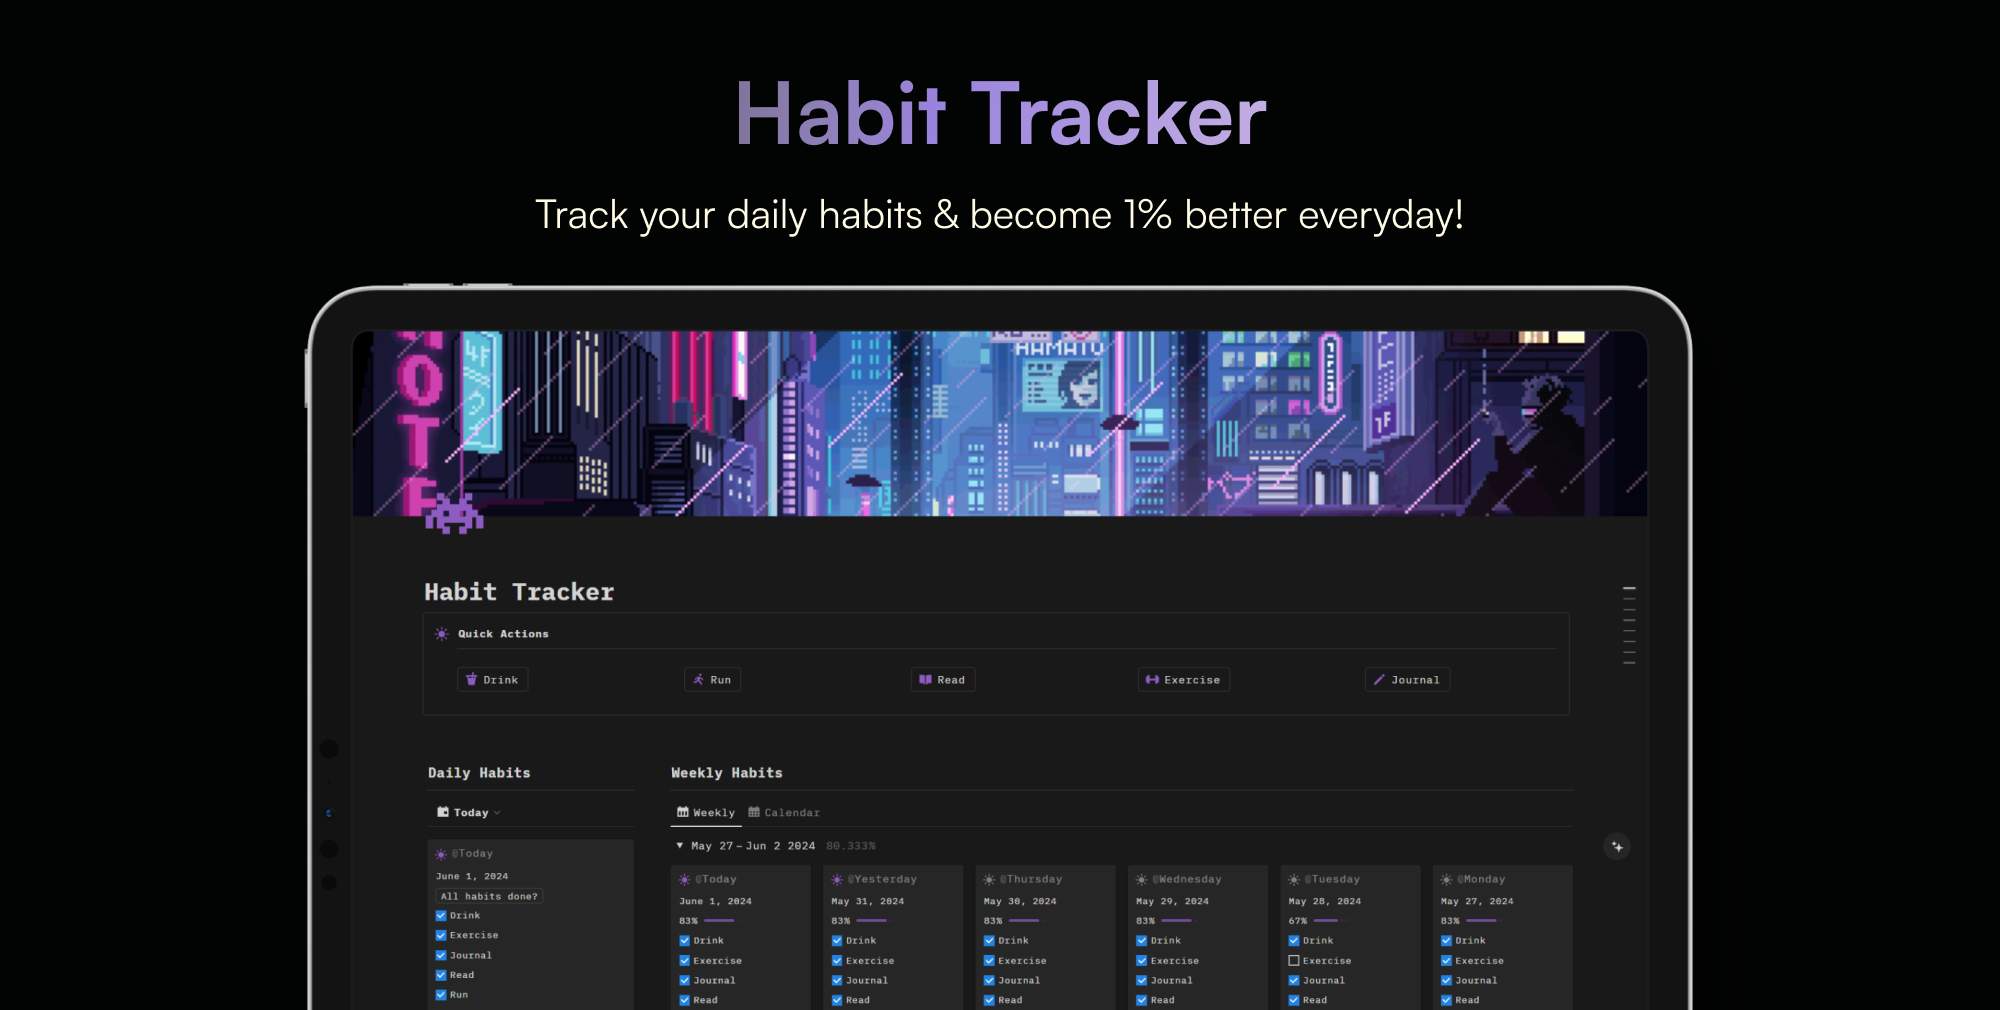 Track Your Daily Habits in Notion

Consistency is the key to success! Track your habits to stay consistent and become 1% better everyday!